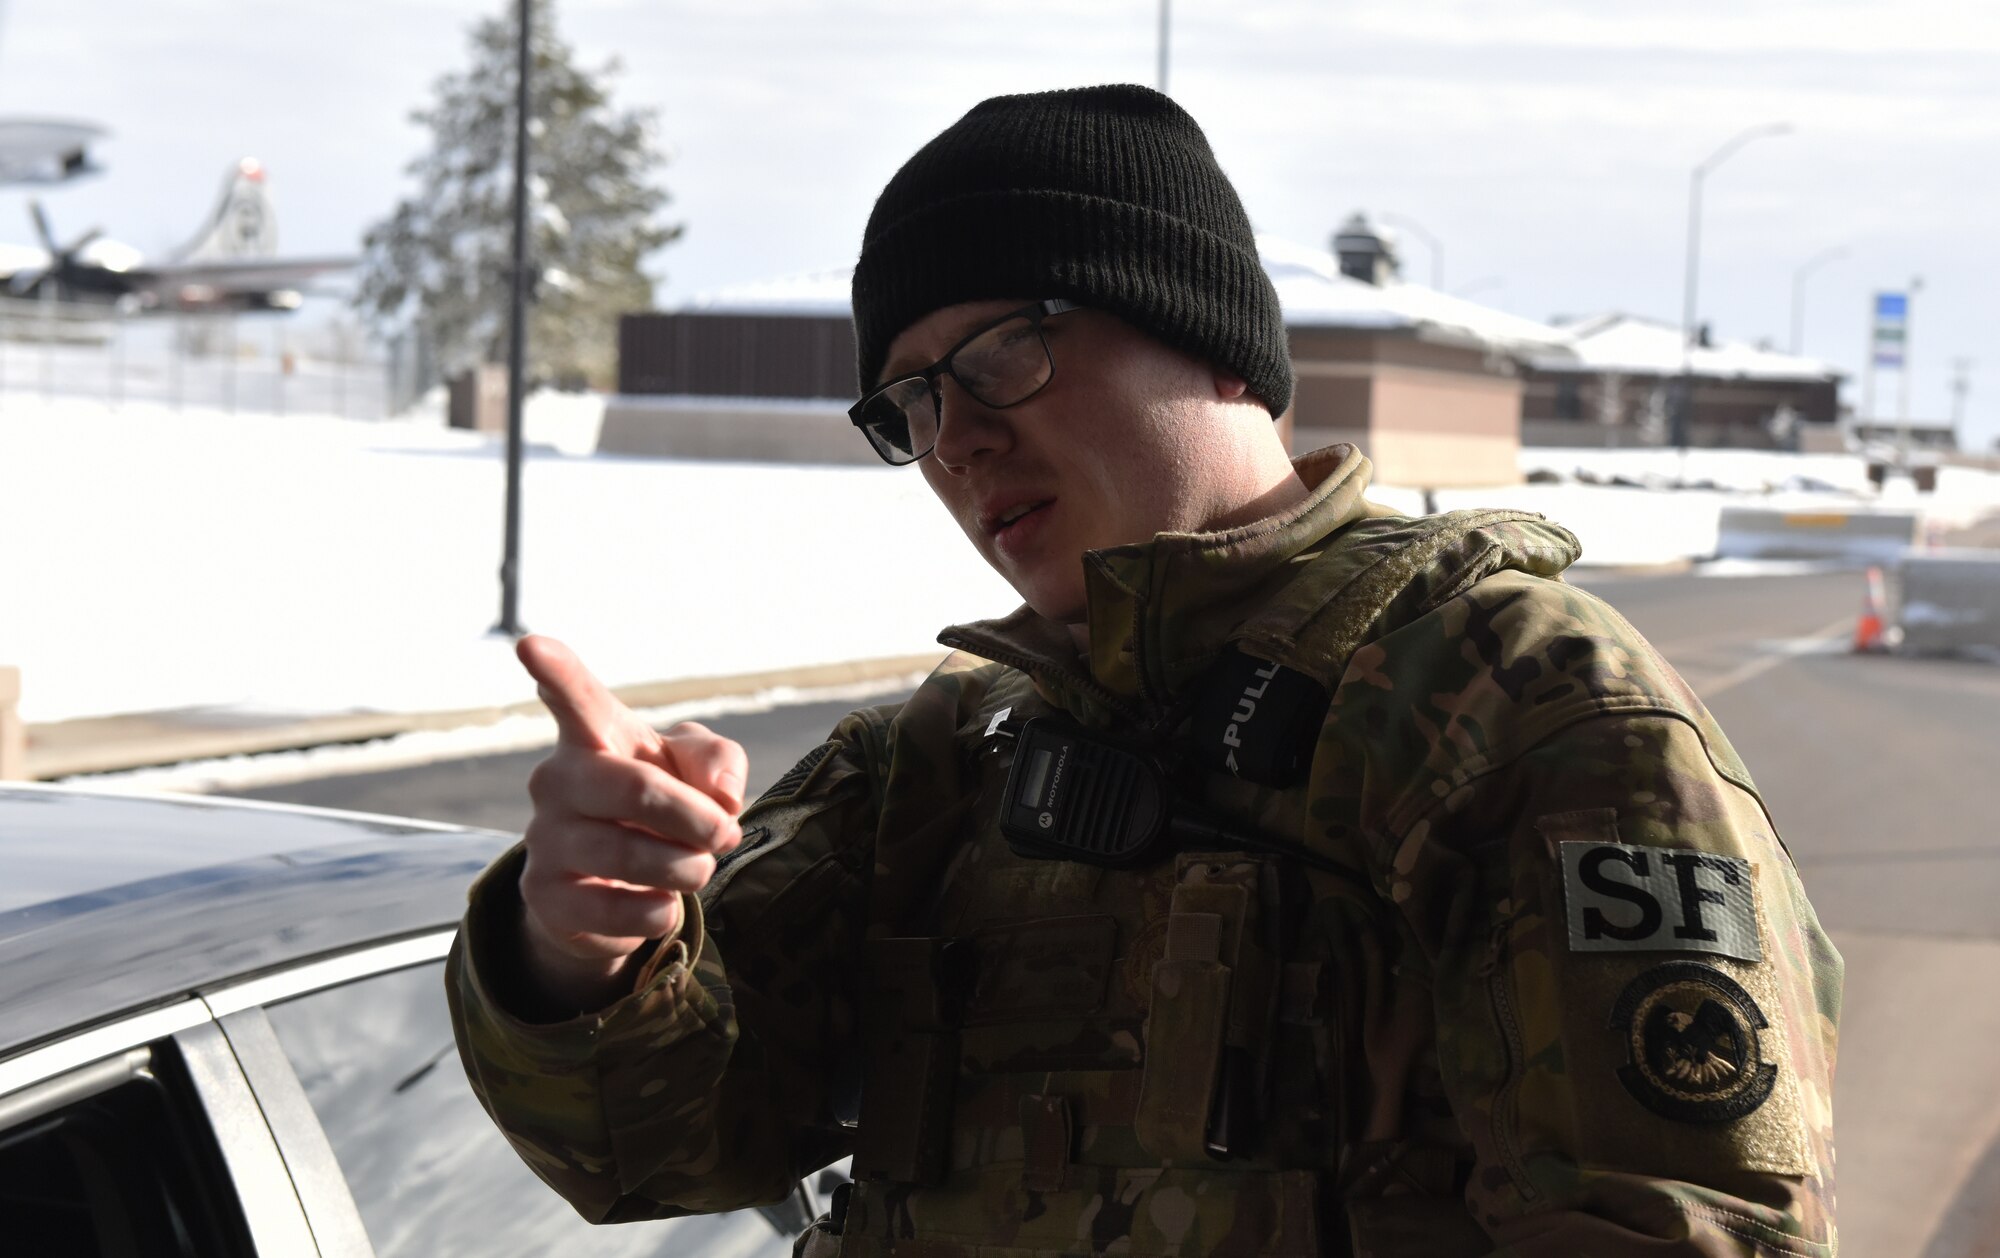 Senior Airman Taylor Tschida, a 28th Security Forces Squadron alarm monitor, gives directions to a person entering Ellsworth Air Force Base, S.D., through Liberty Gate on Dec. 4, 2018. Each person that comes through the gate gets checked for proper authorization, correct seatbelt wear and that their vehicle has registration on the plates. (U.S. Air Force photo by 2nd Lt. Joshua Sinclair)